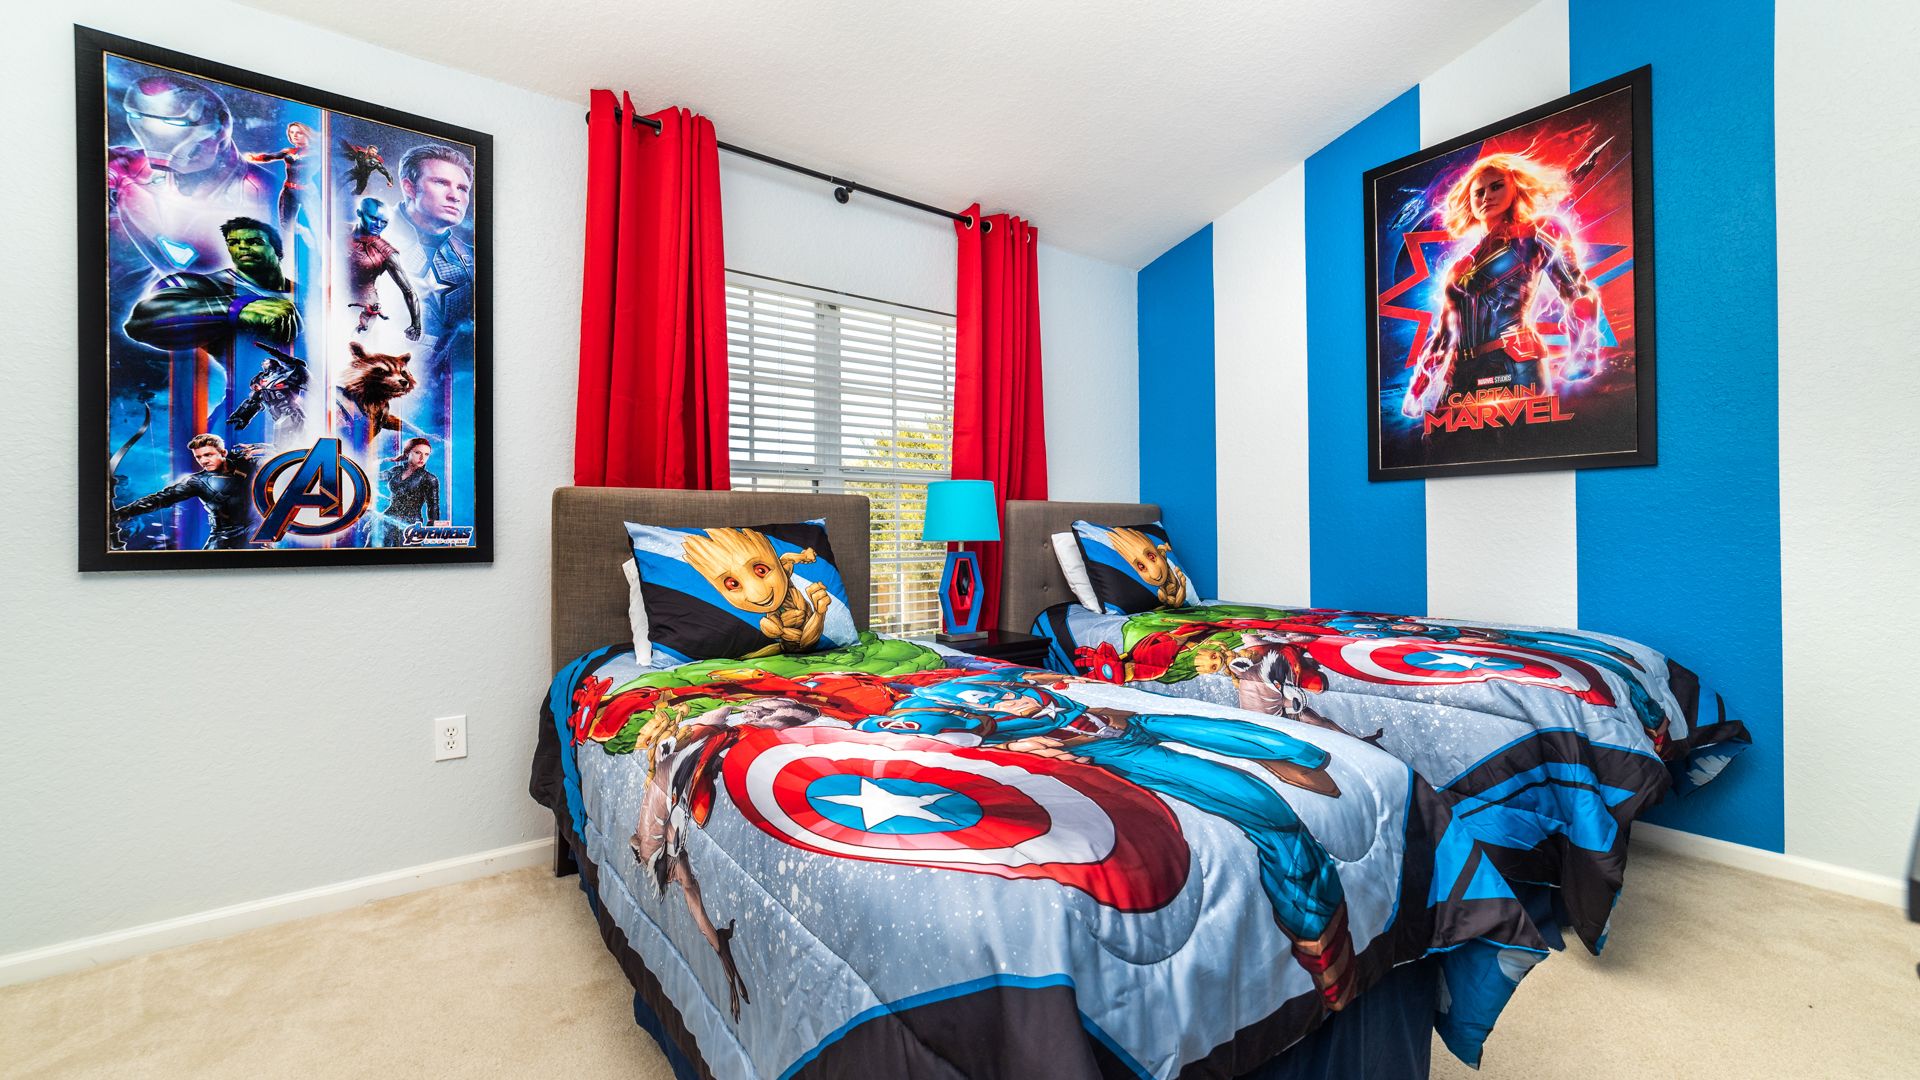 Two Twins Suite Bedroom 2 
Upstairs
Avengers